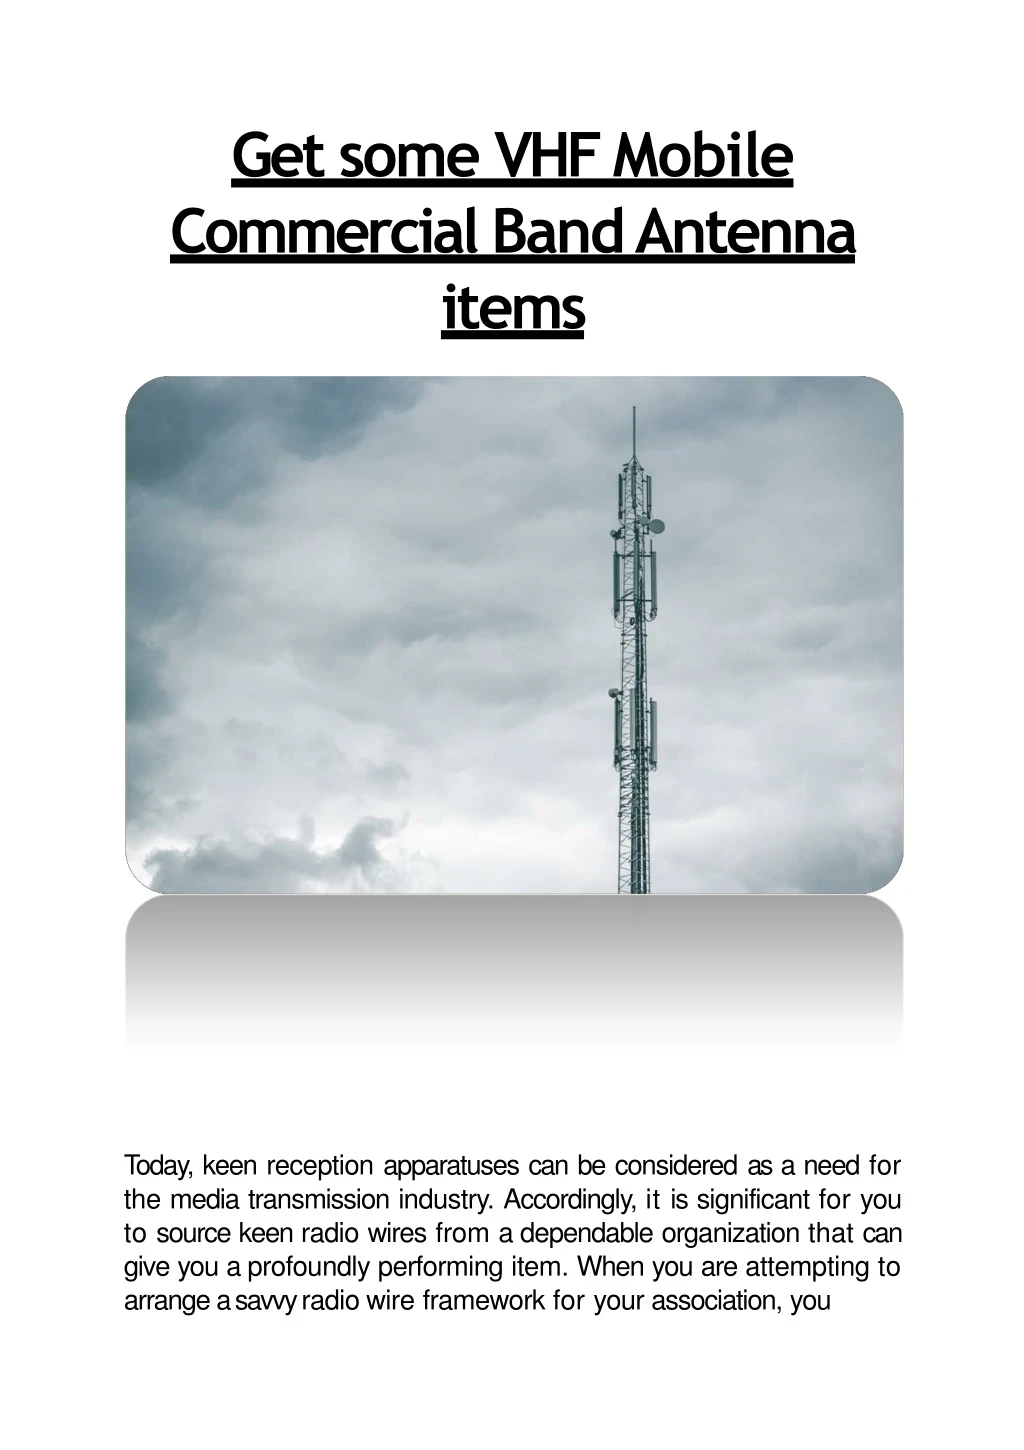 get some vhf mobile commercial band antenna items